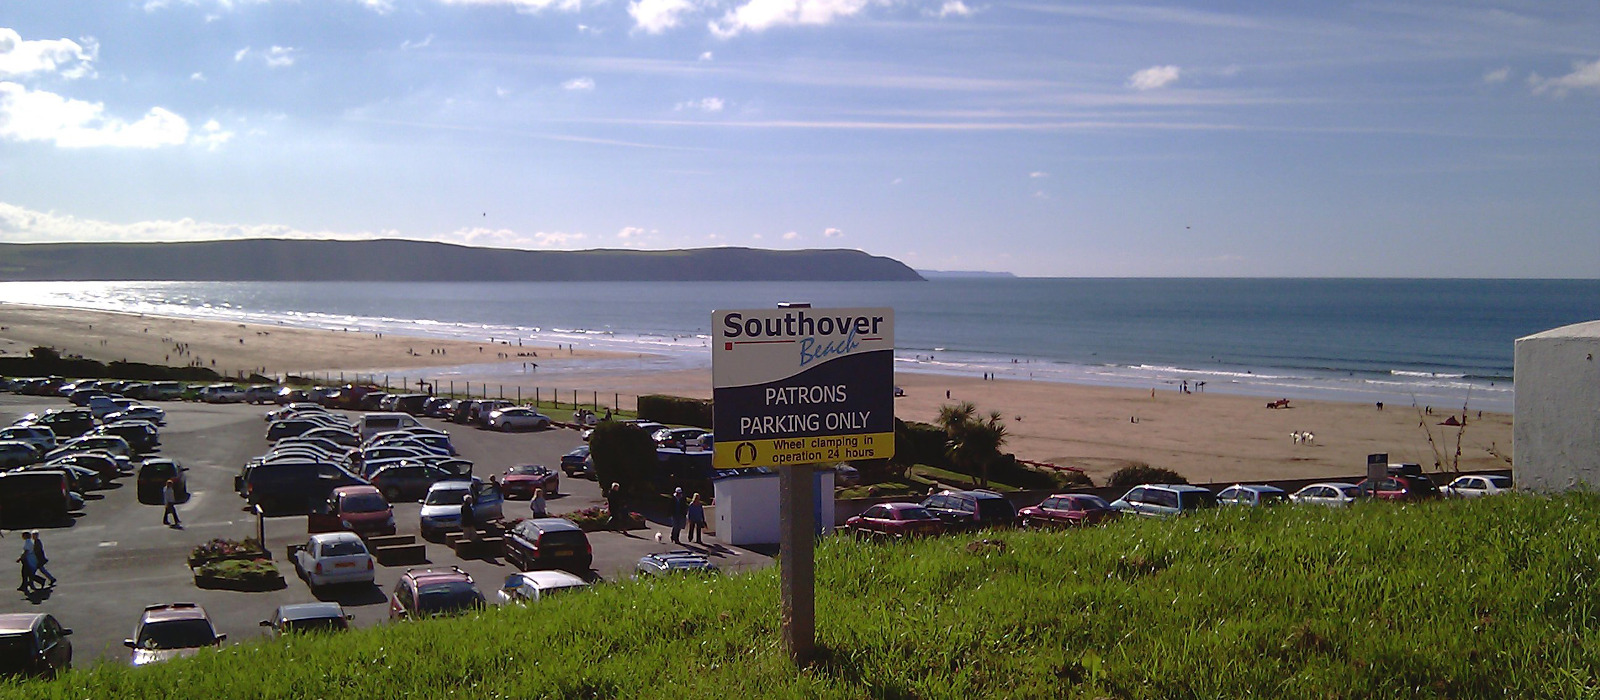 Parking at Southover Beach